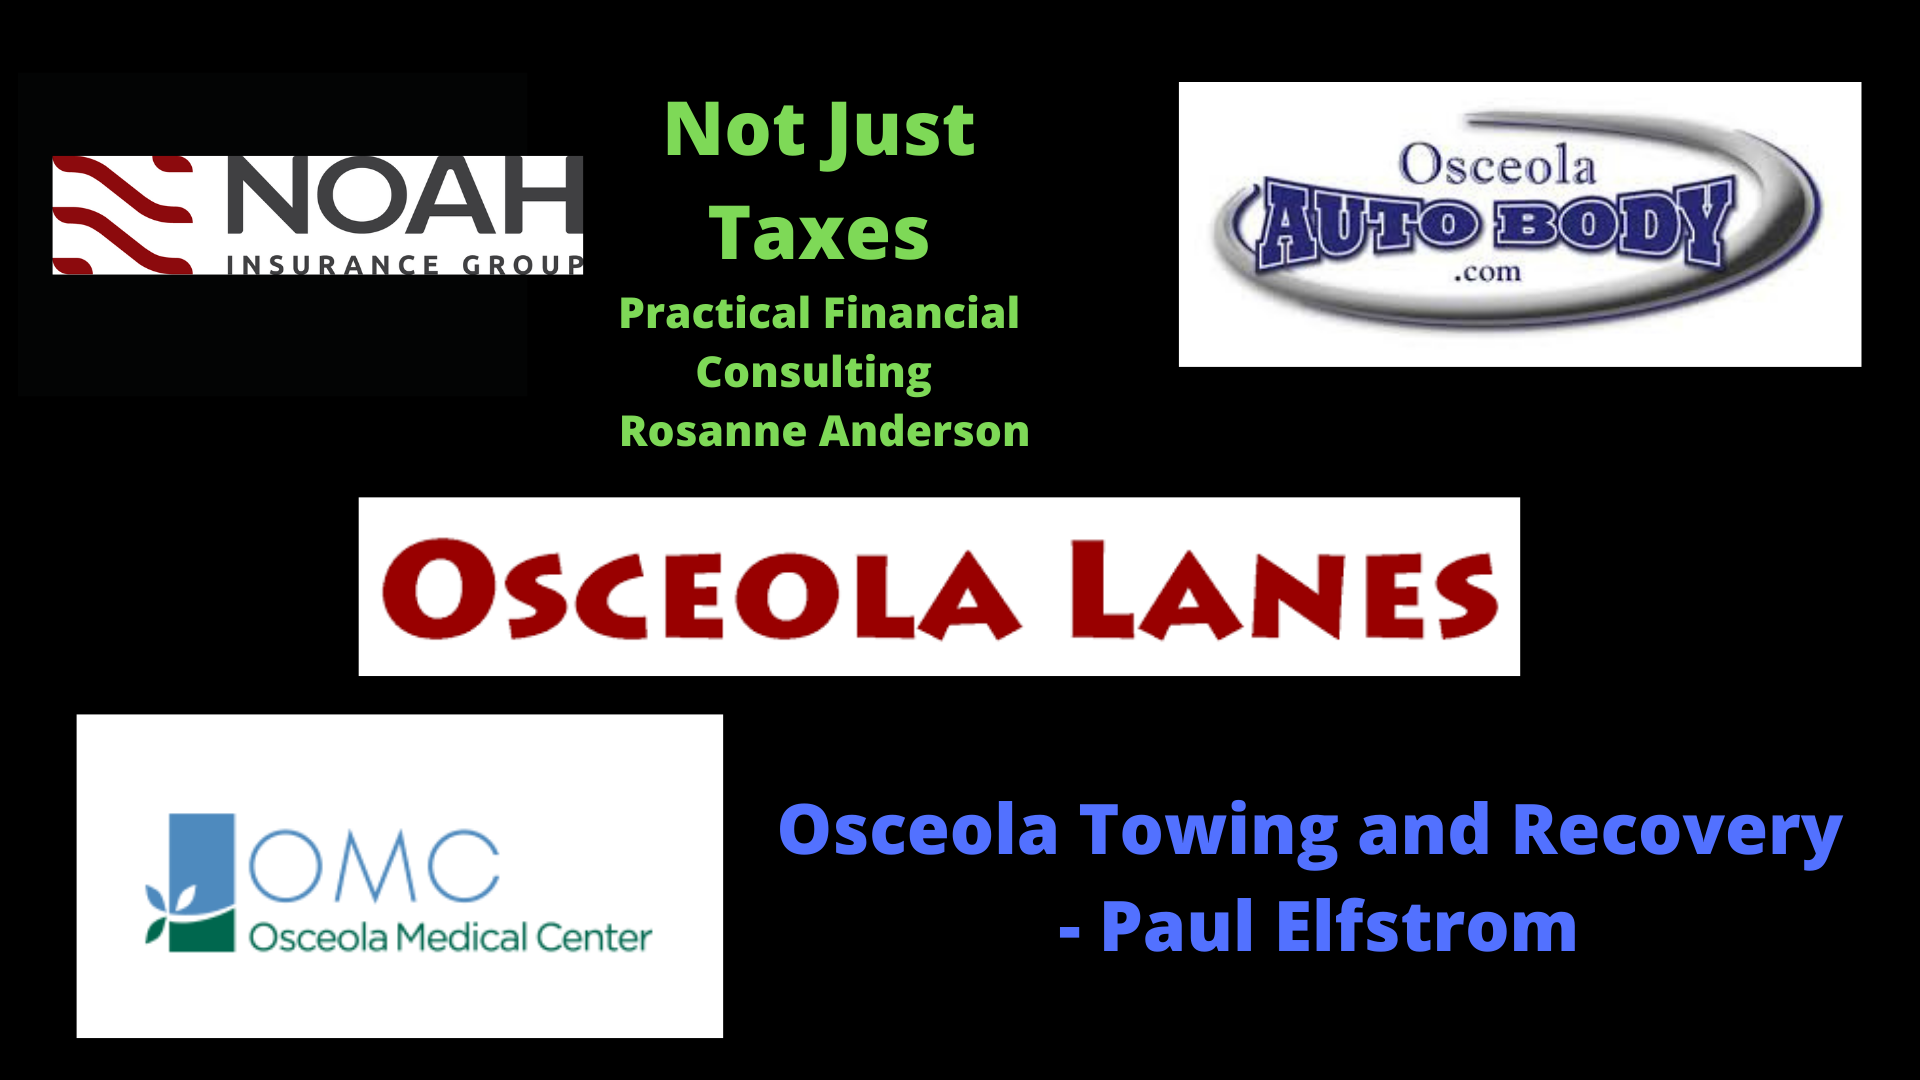 Thank you to our sponsors for supporting Osceola Athletics